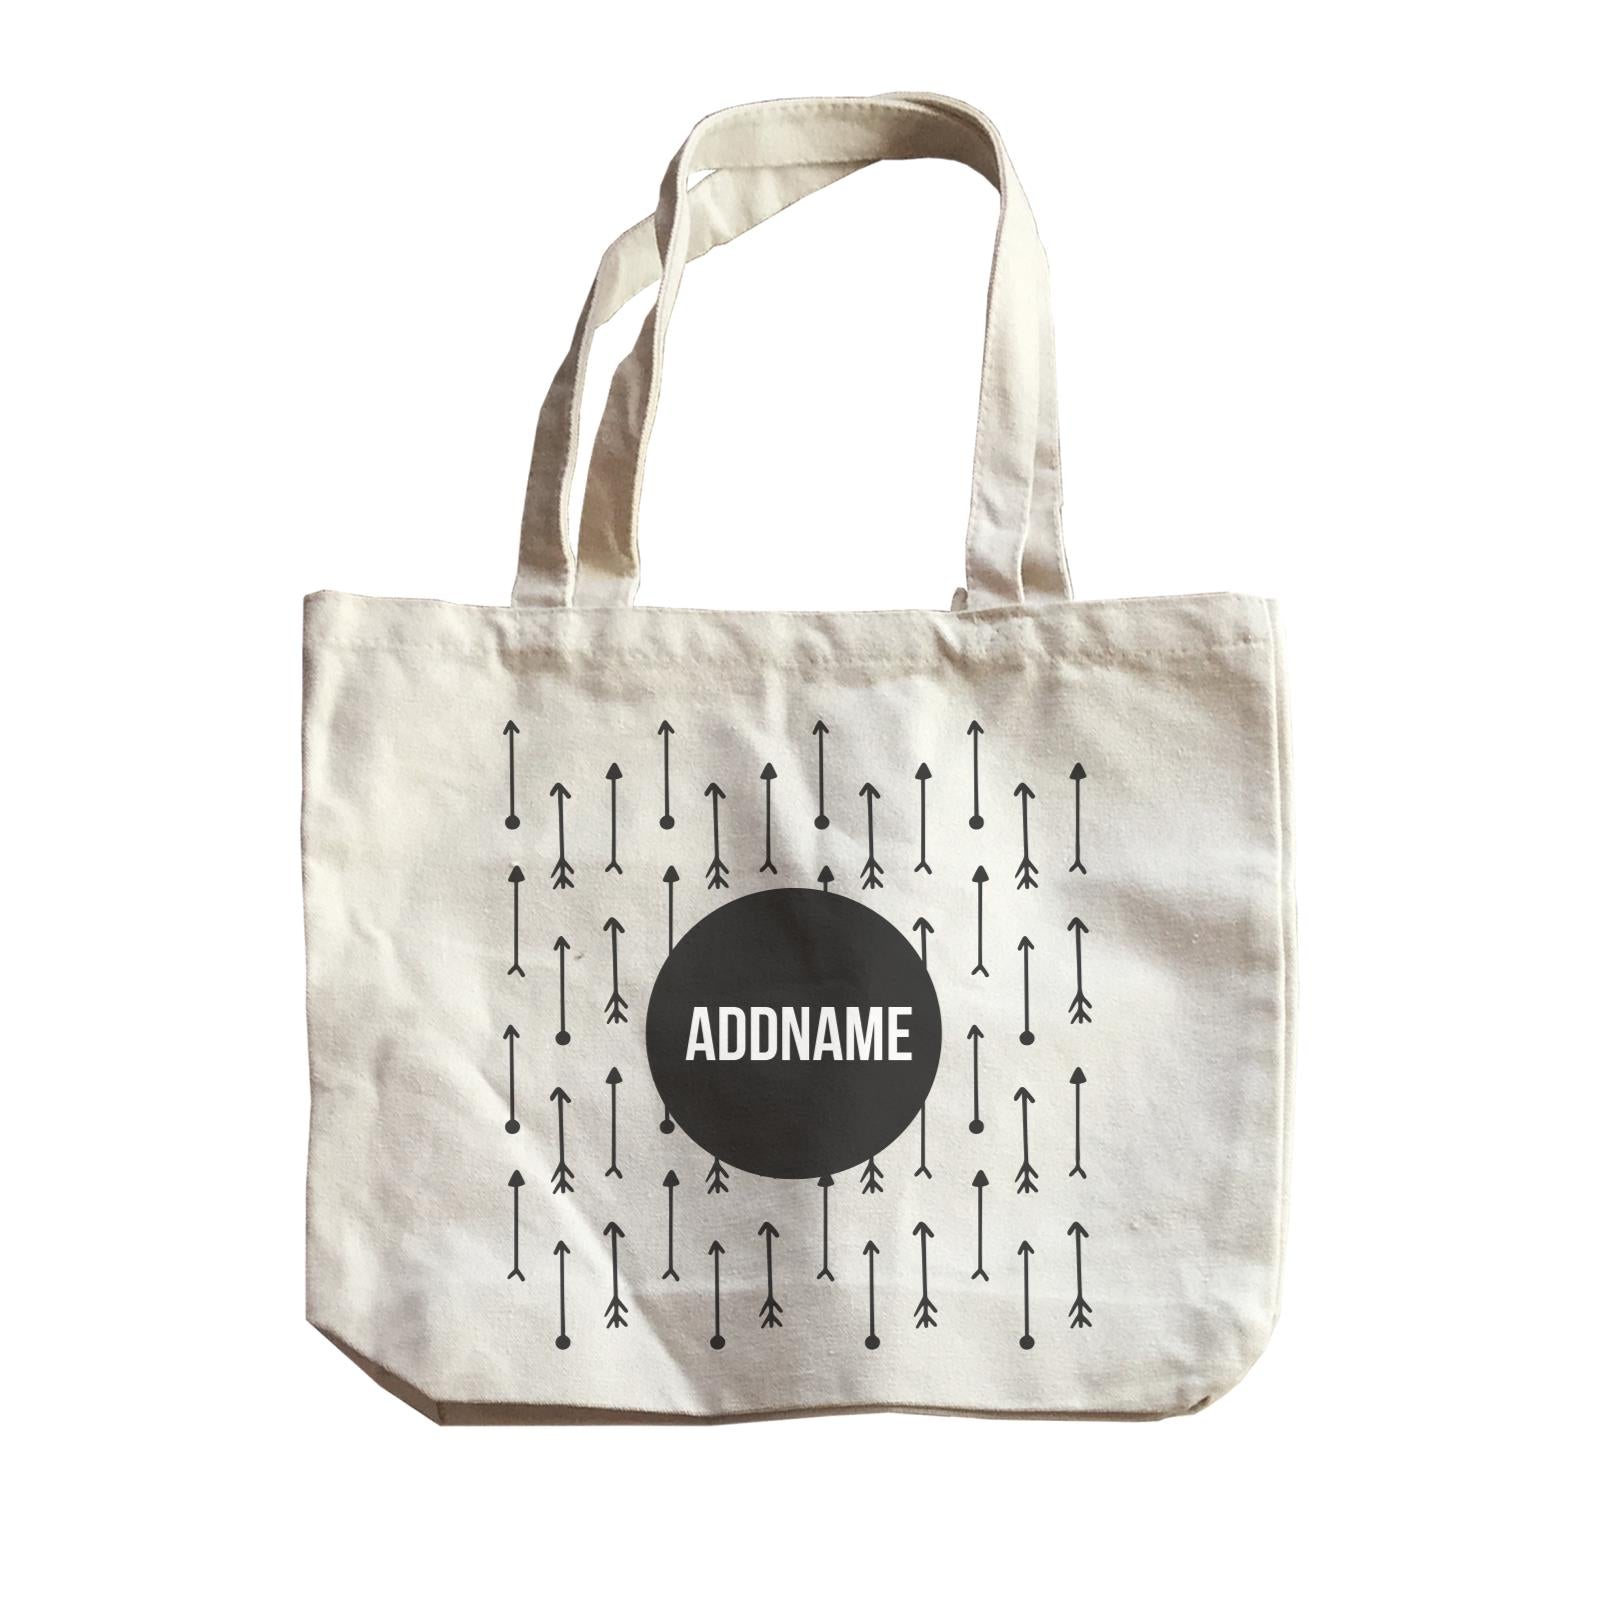 Monochrome Black Circle with Arrows Addname Canvas Bag